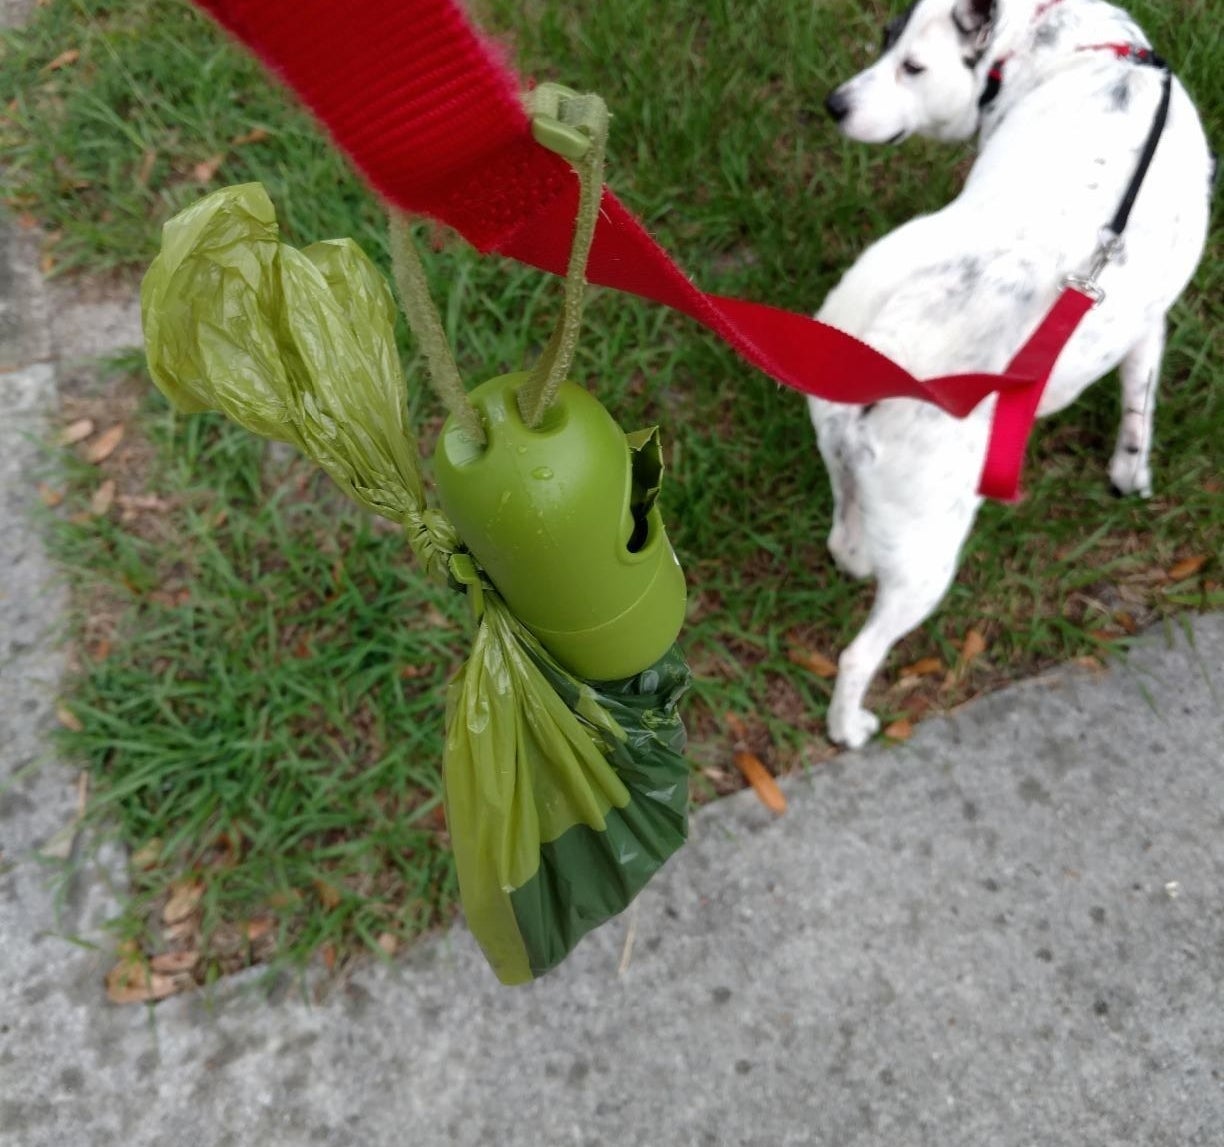 reviewer walking their dog with a red leash and the poop bags attached to the leash